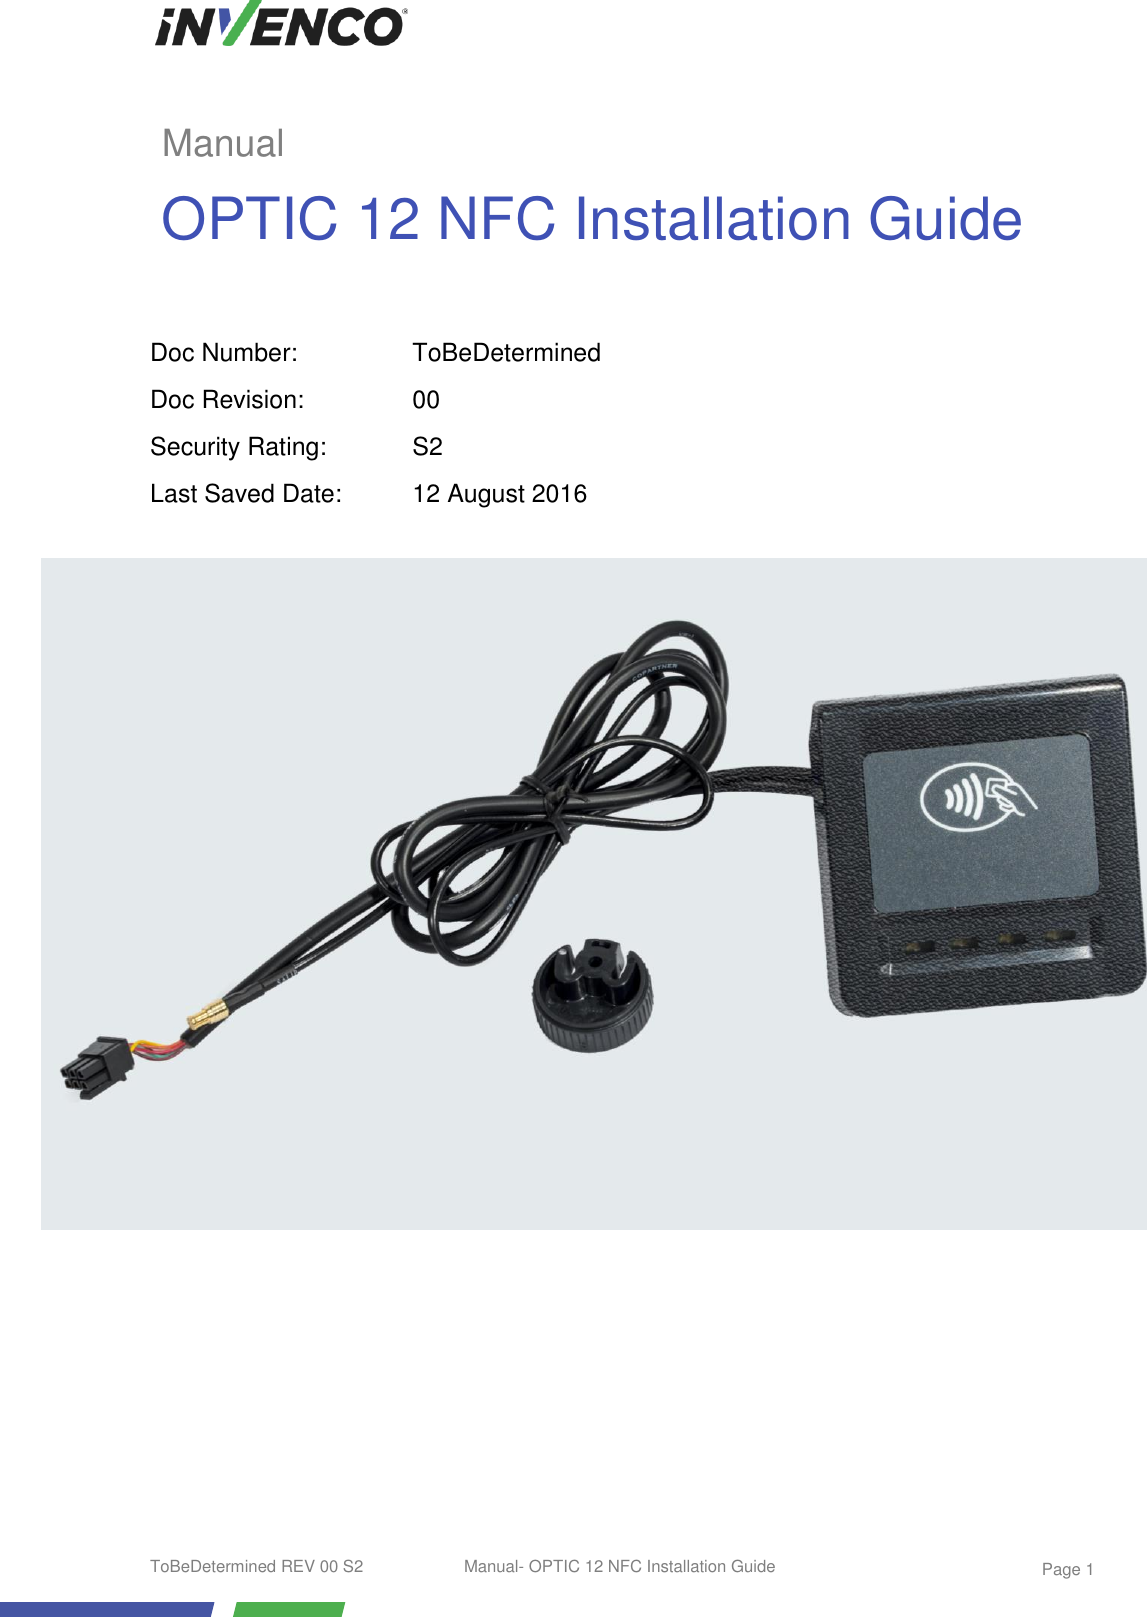  ToBeDetermined REV 00 S2  Manual- OPTIC 12 NFC Installation Guide    Page 1                         Doc Number: ToBeDetermined Doc Revision: 00 Security Rating: S2 Last Saved Date: 12 August 2016 Manual OPTIC 12 NFC Installation Guide 